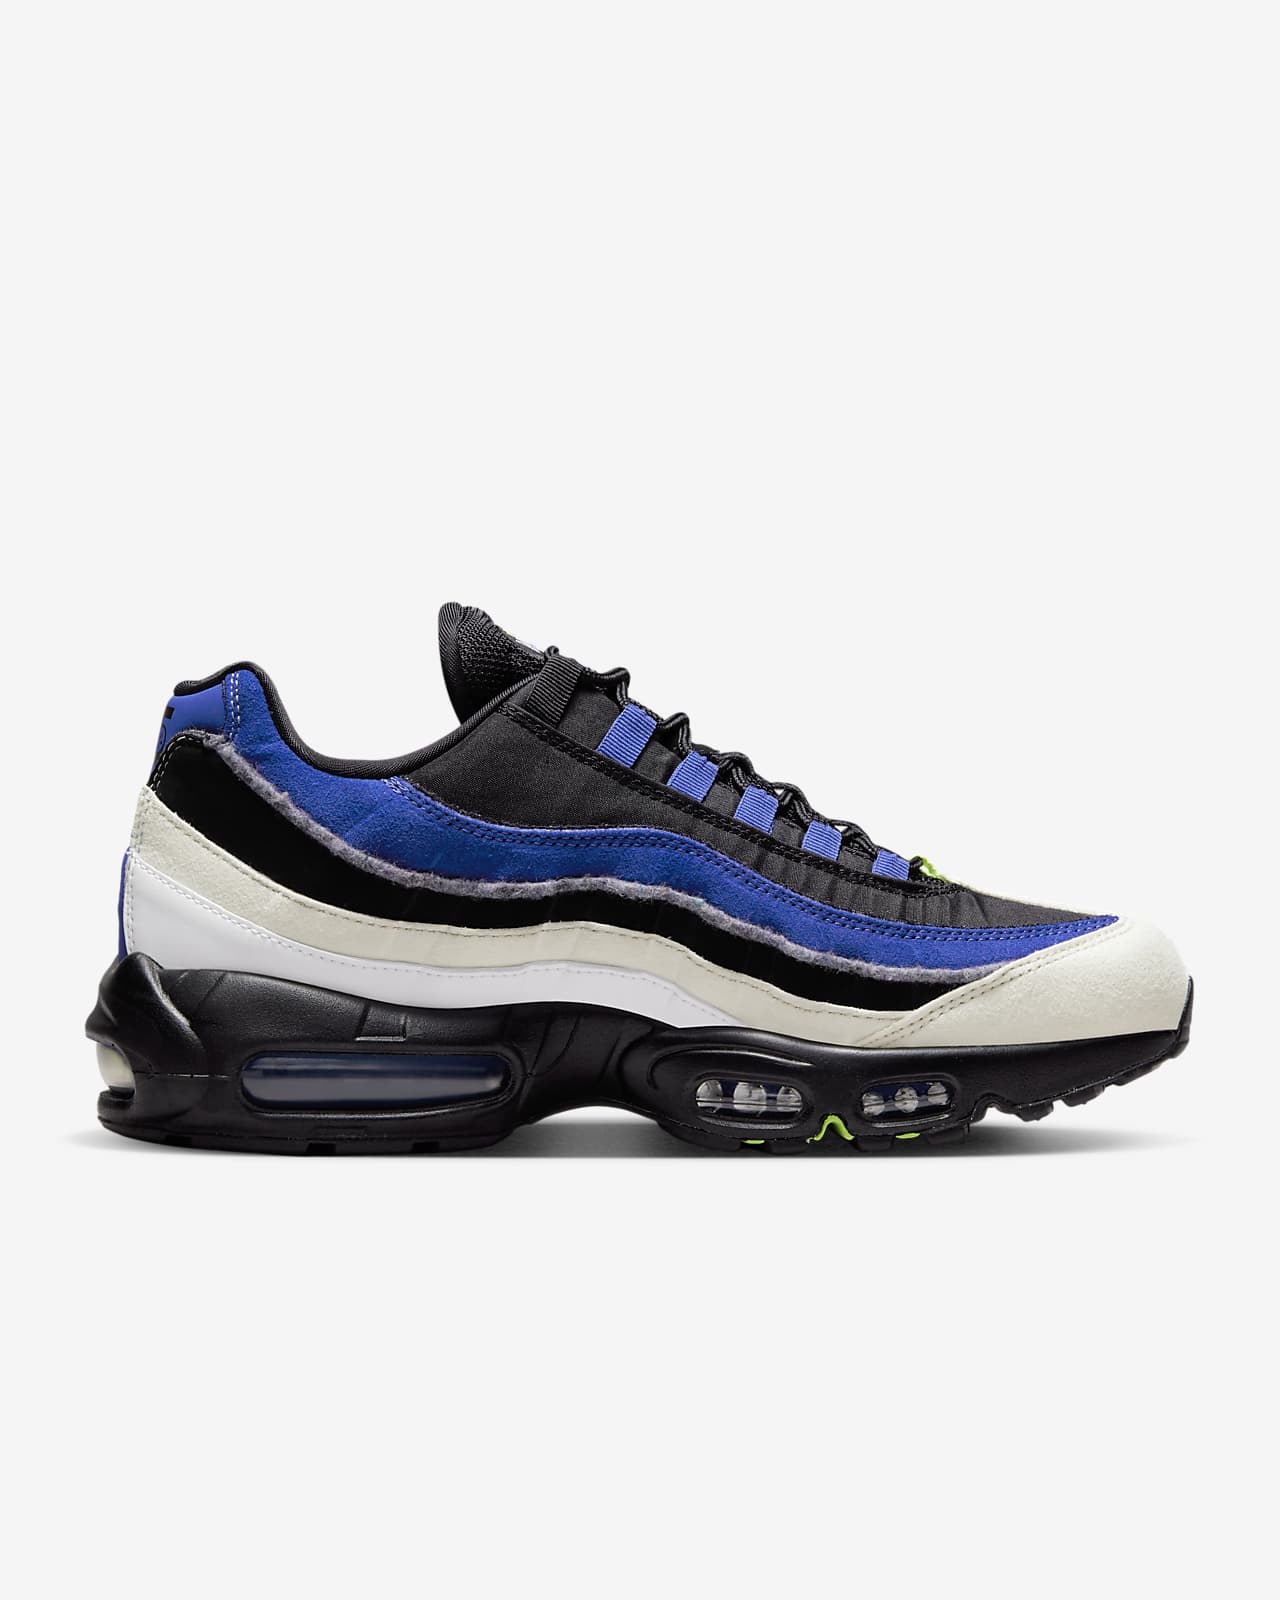 size 14 nike air max 95 shoes